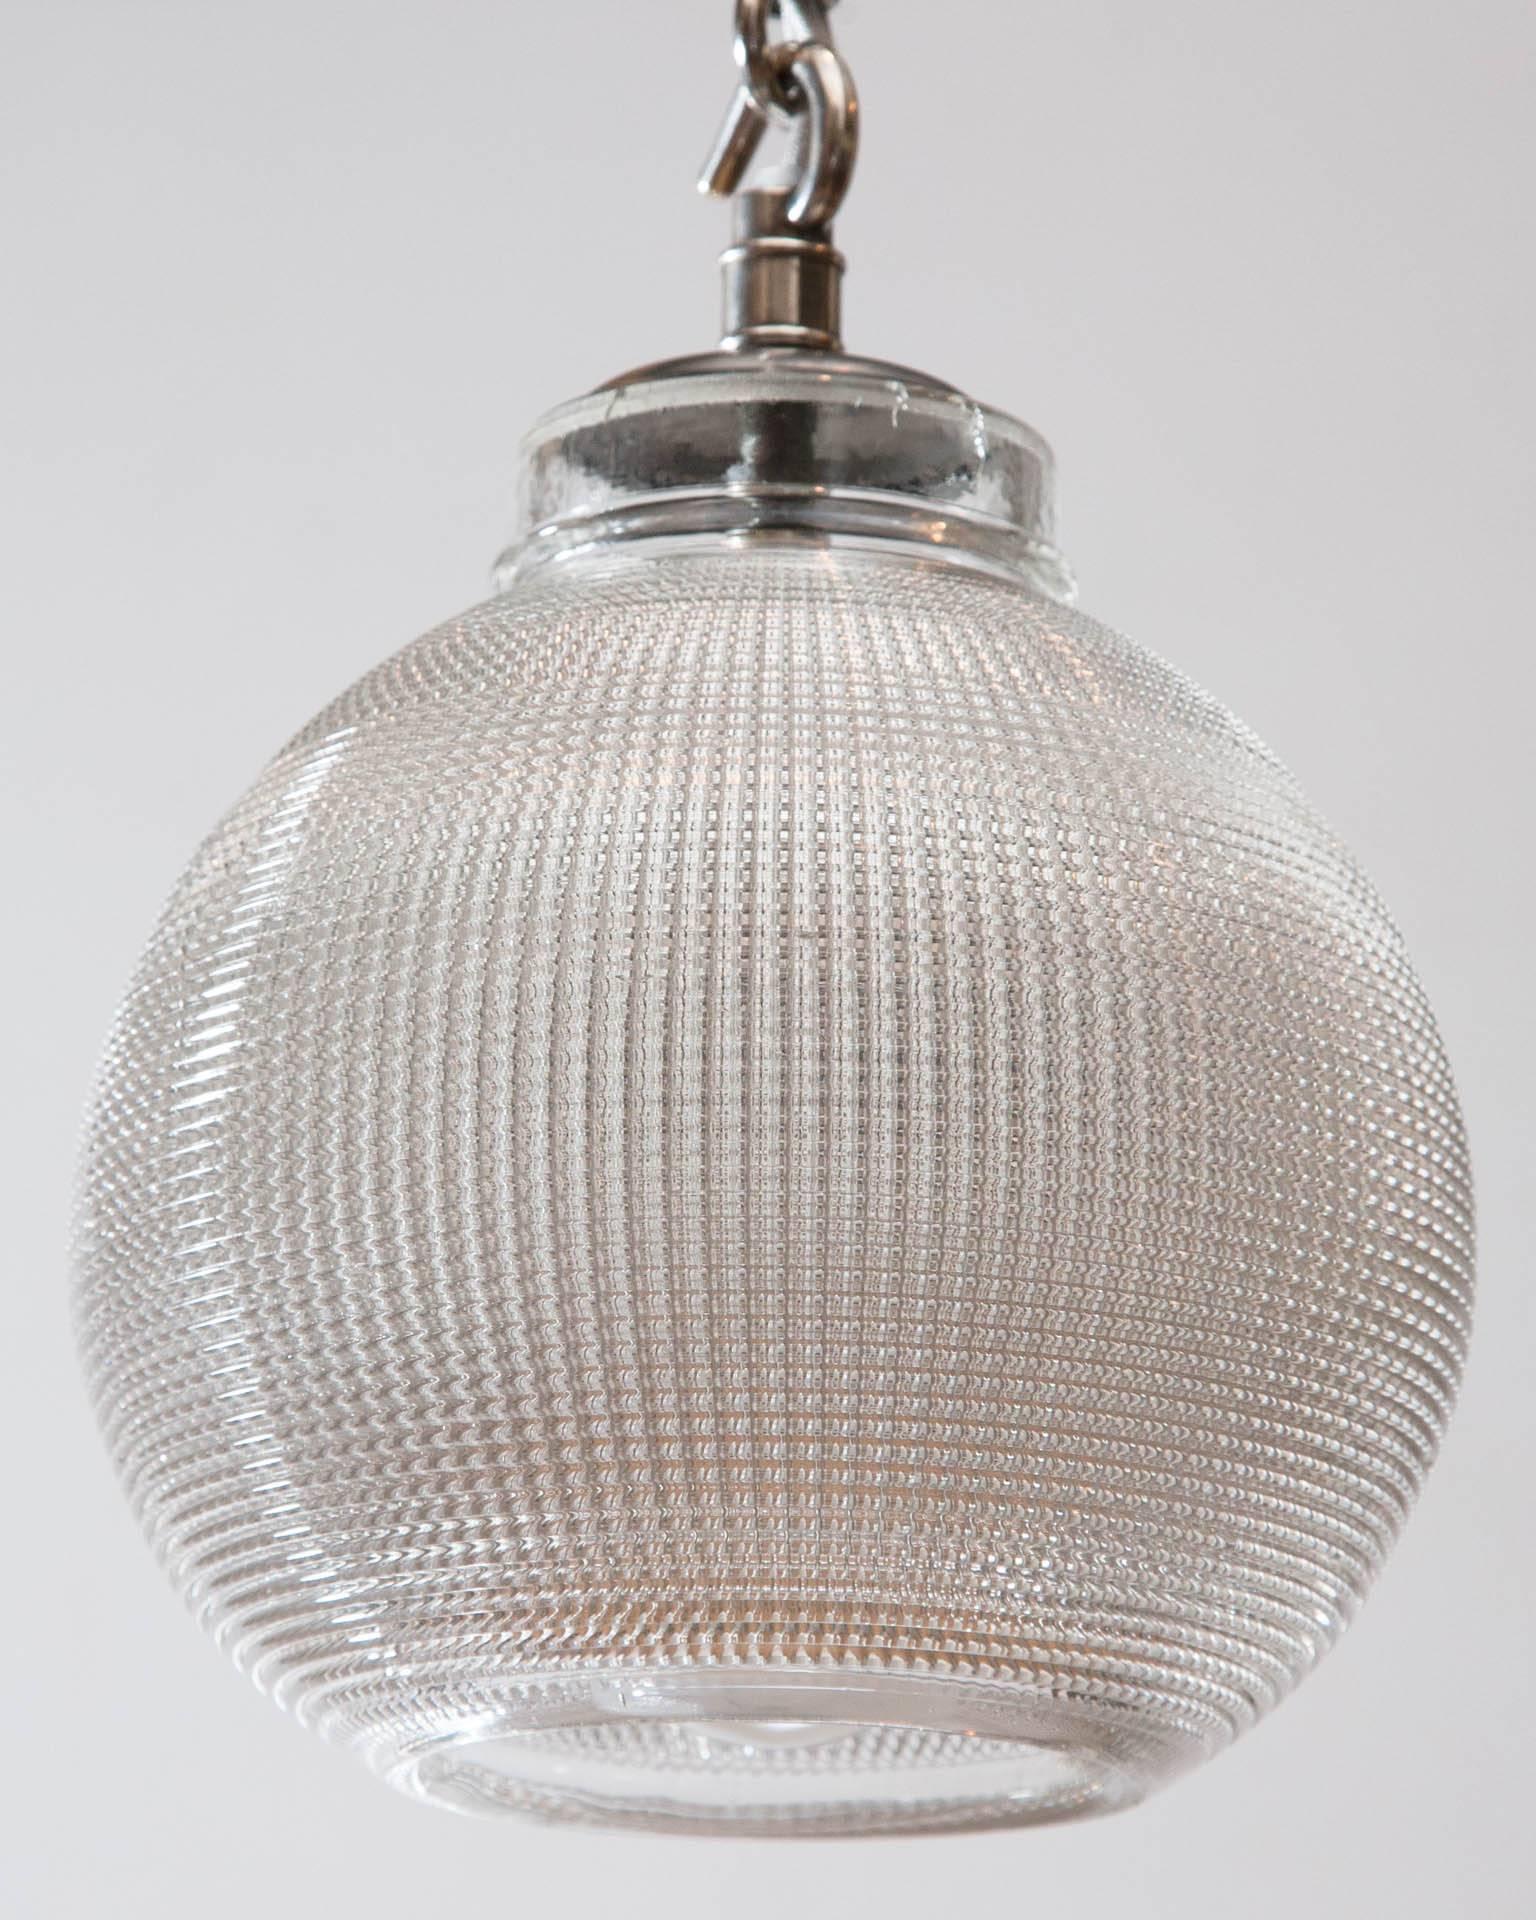 Early 20th century holophane globe dish light with hammered silver gallery.
English or American, circa 1910.
   